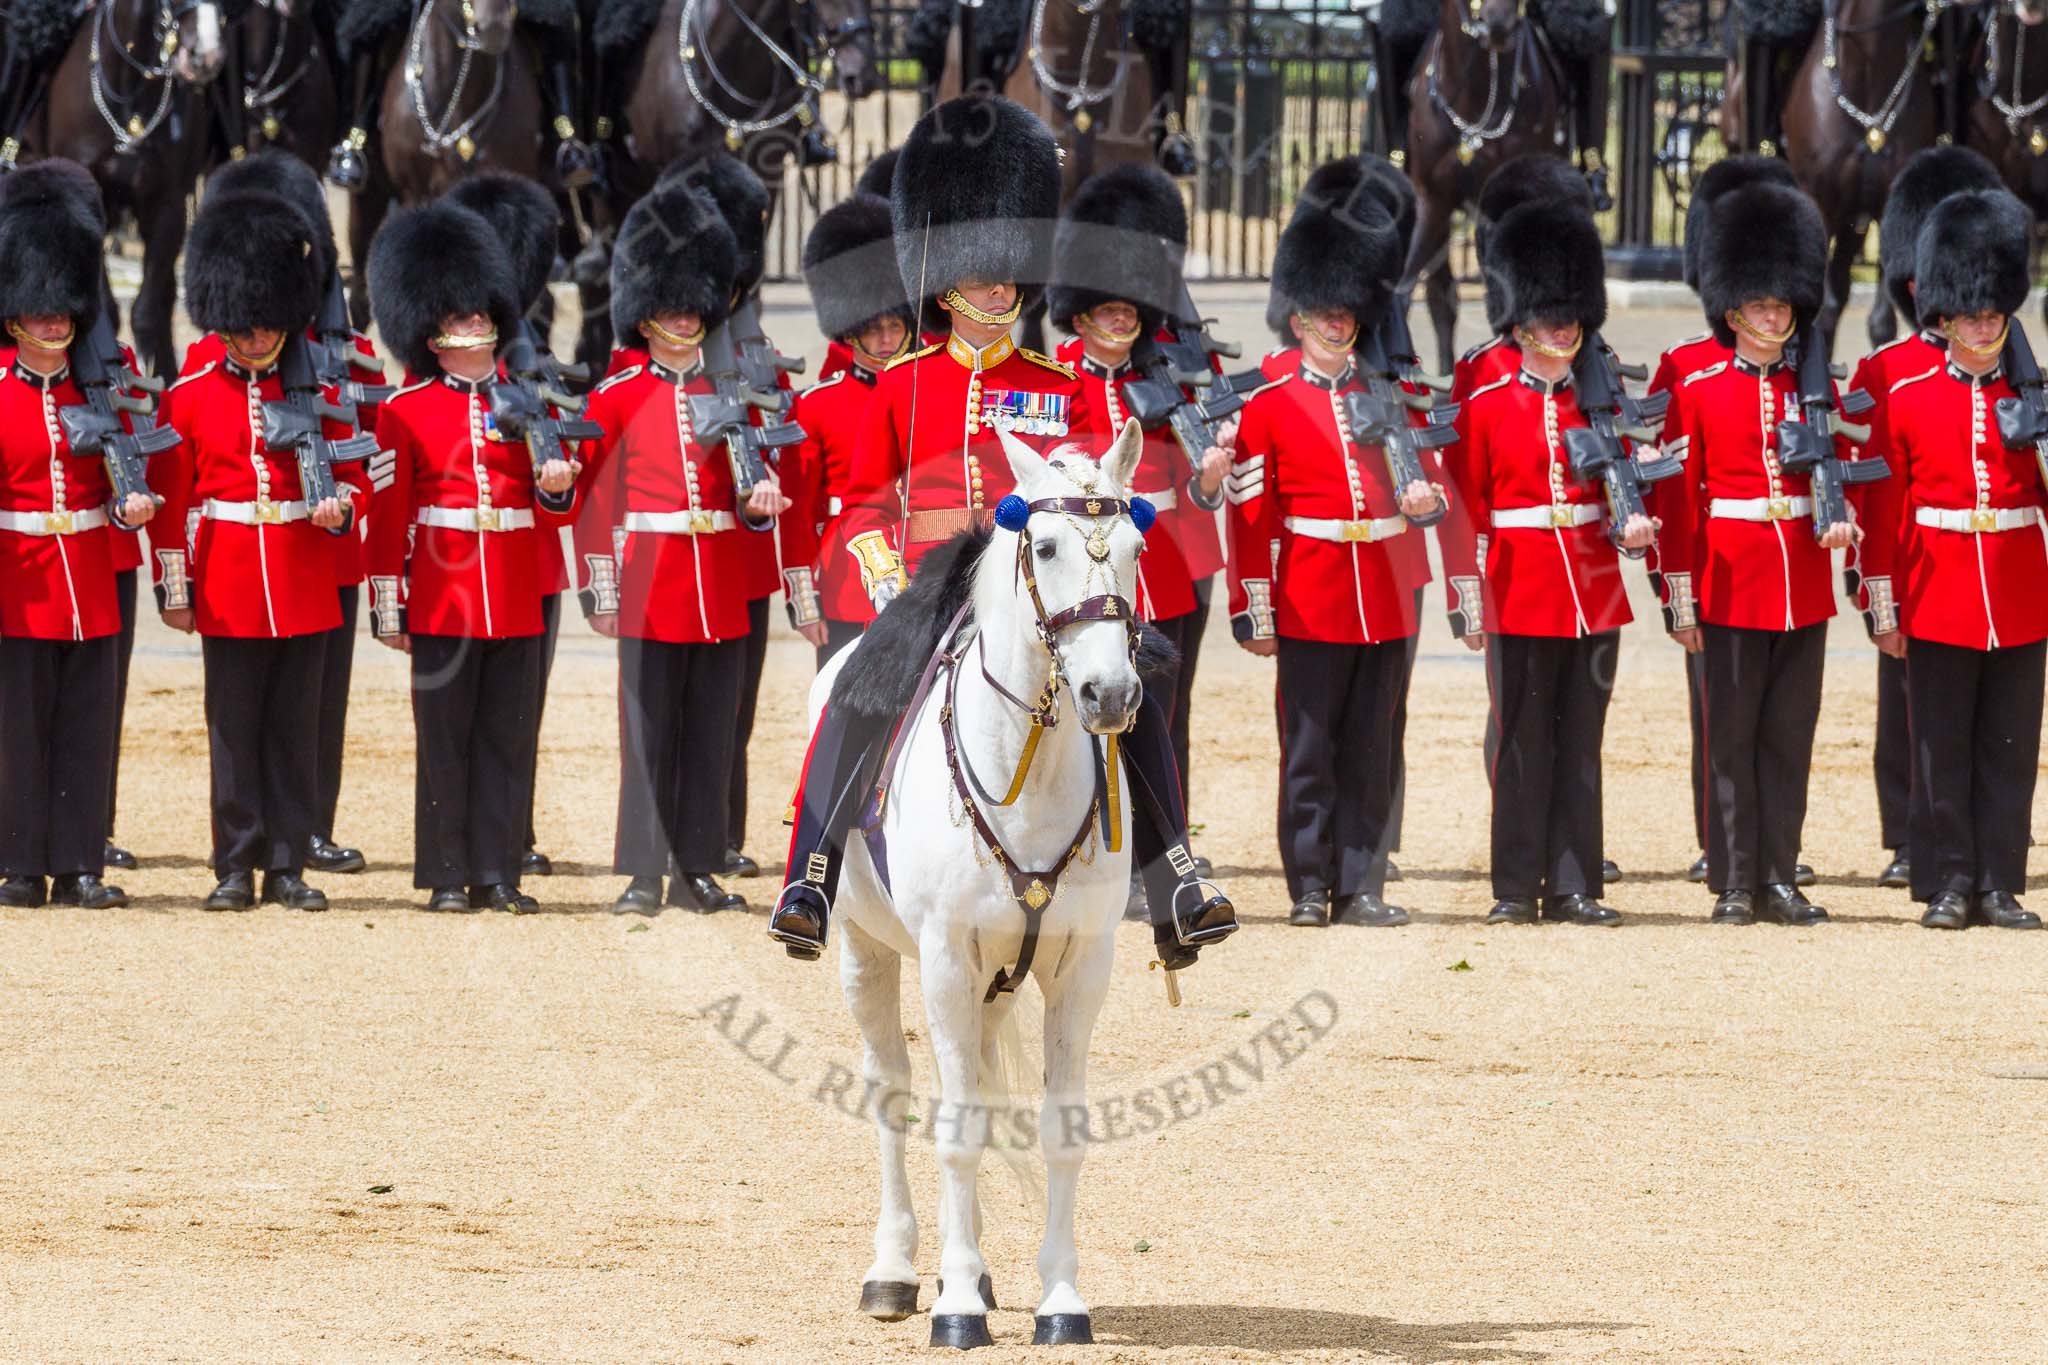 The Colonel's Review 2015.
Horse Guards Parade, Westminster,
London,

United Kingdom,
on 06 June 2015 at 11:59, image #554